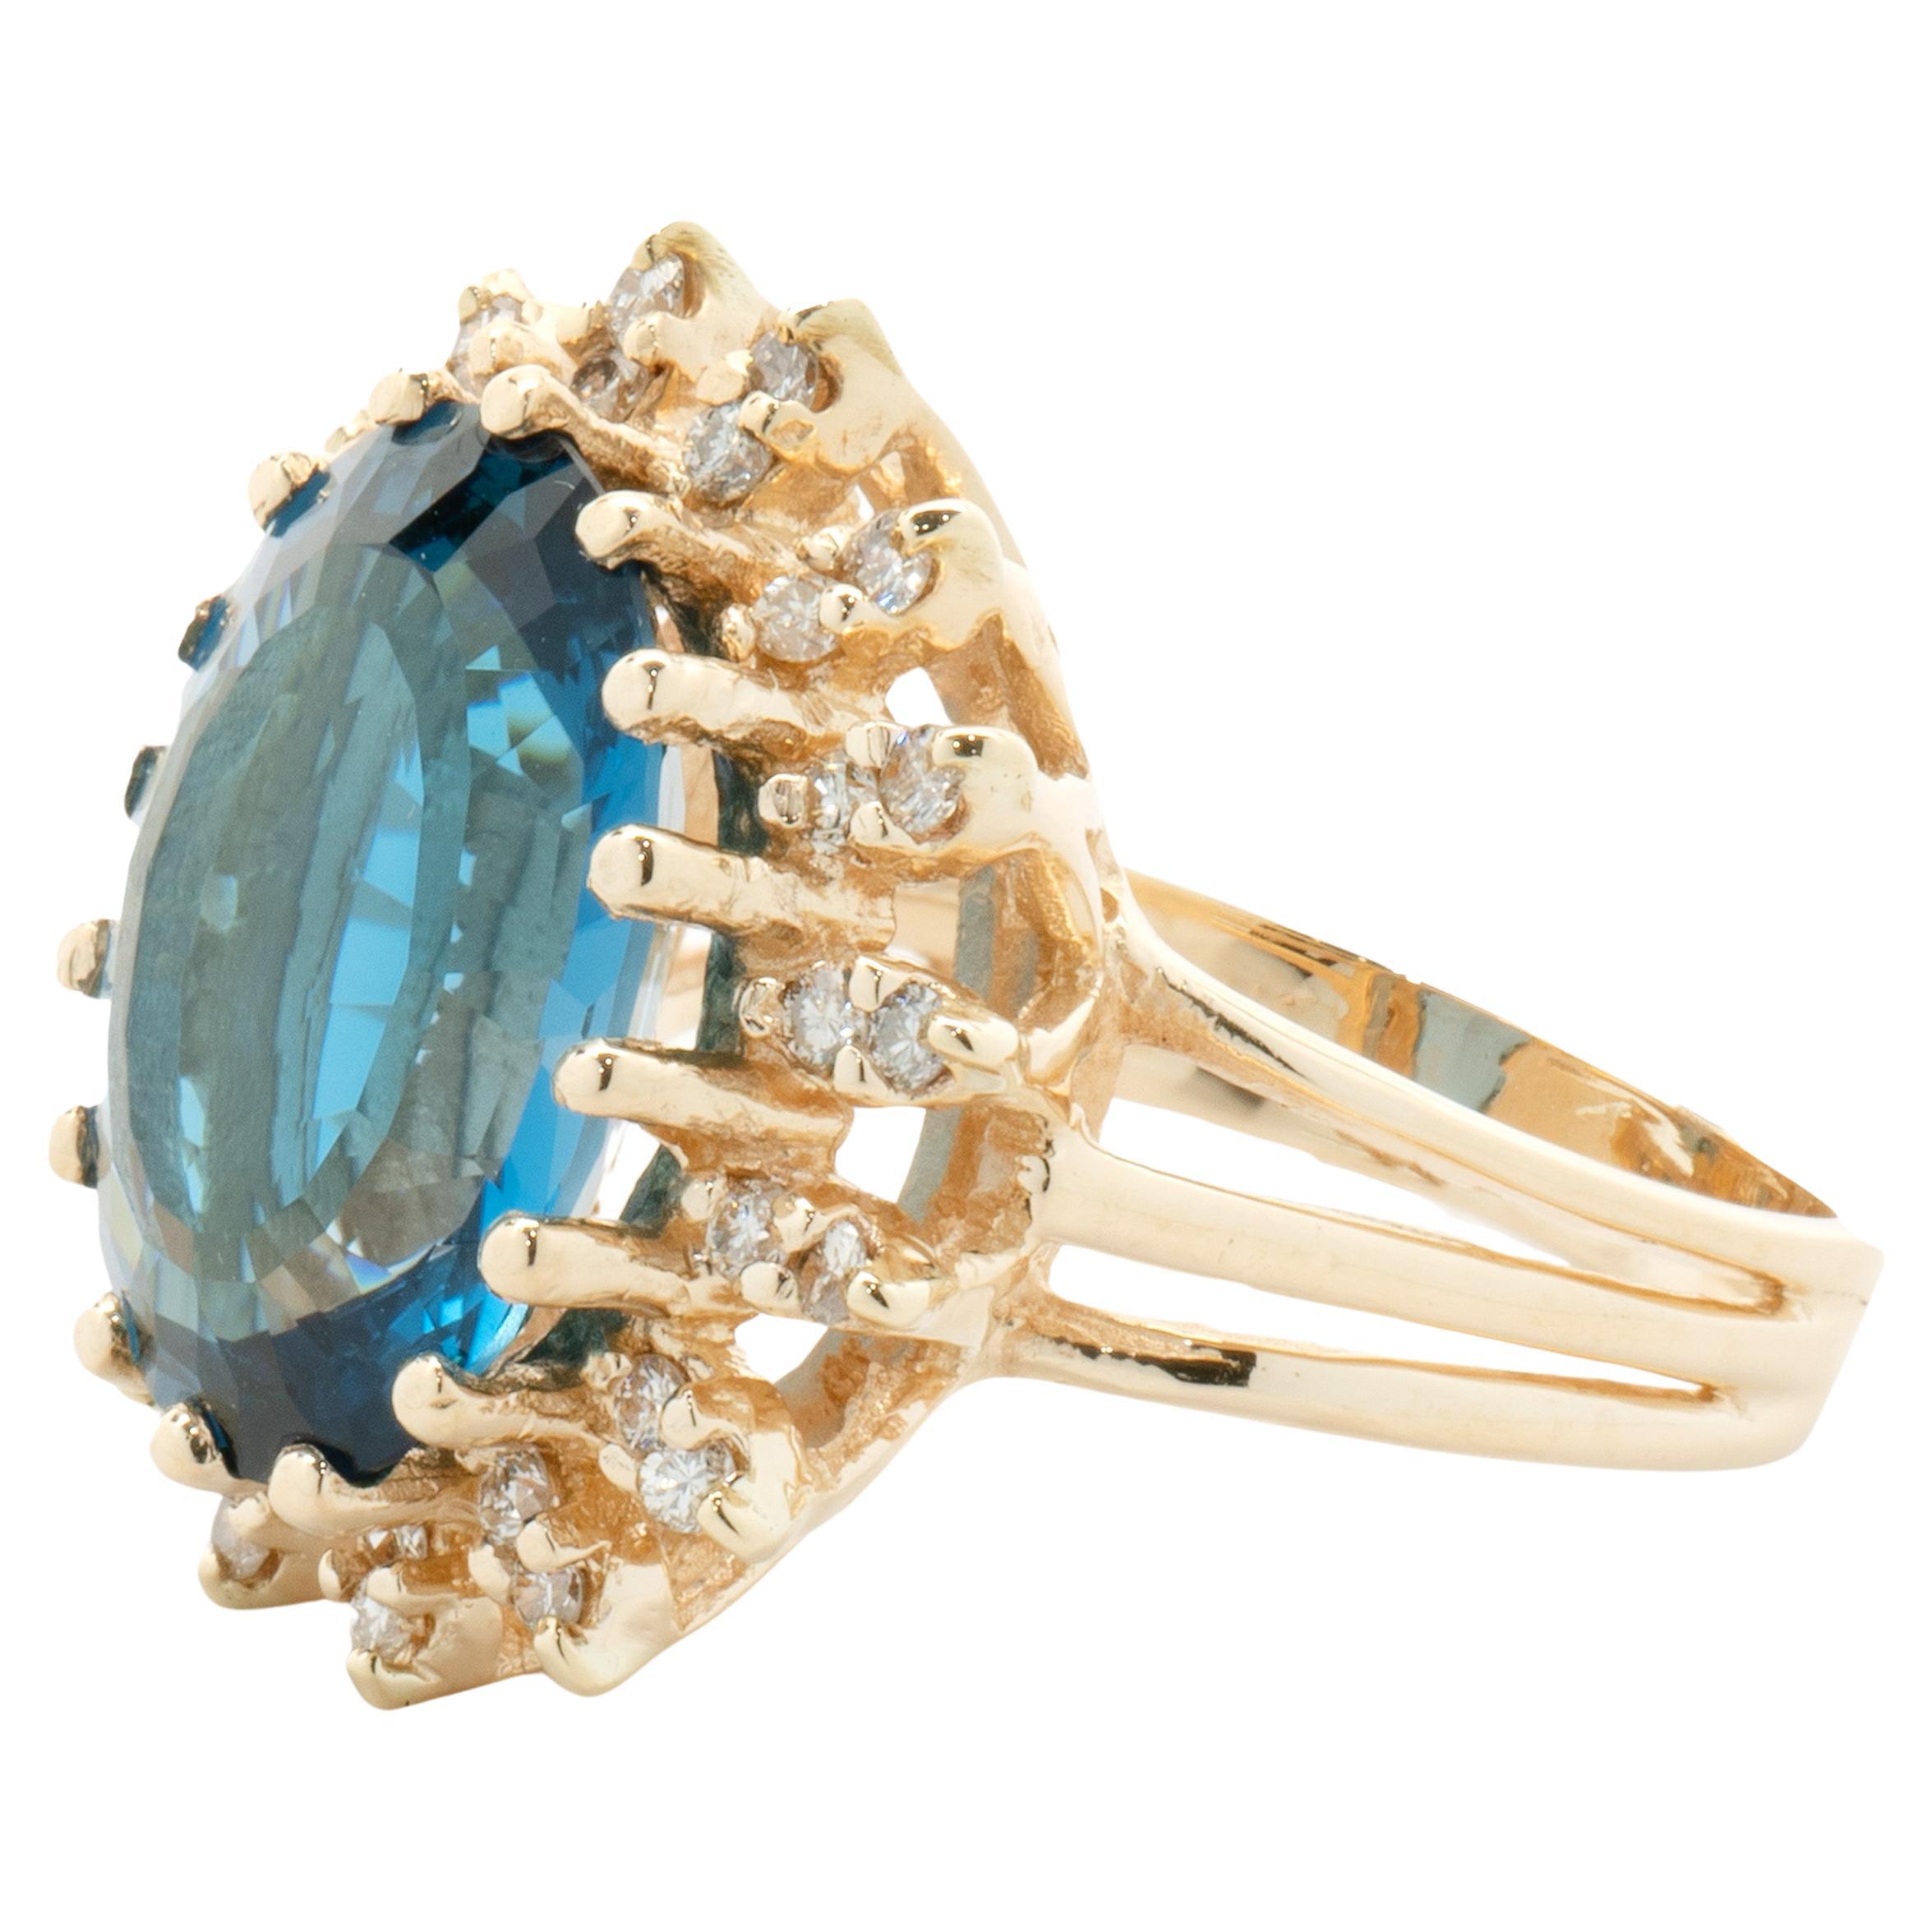 Designer: custom
Material: 14K yellow gold
Diamond: 32 round brilliant cut = 0.60cttw
Color: K
Clarity: SI1-2
Blue Topaz: 1 oval cut 9.20ct
Dimension: ring top measures 32mm wide
Ring Size: 7 (please allow two extra shipping days for sizing